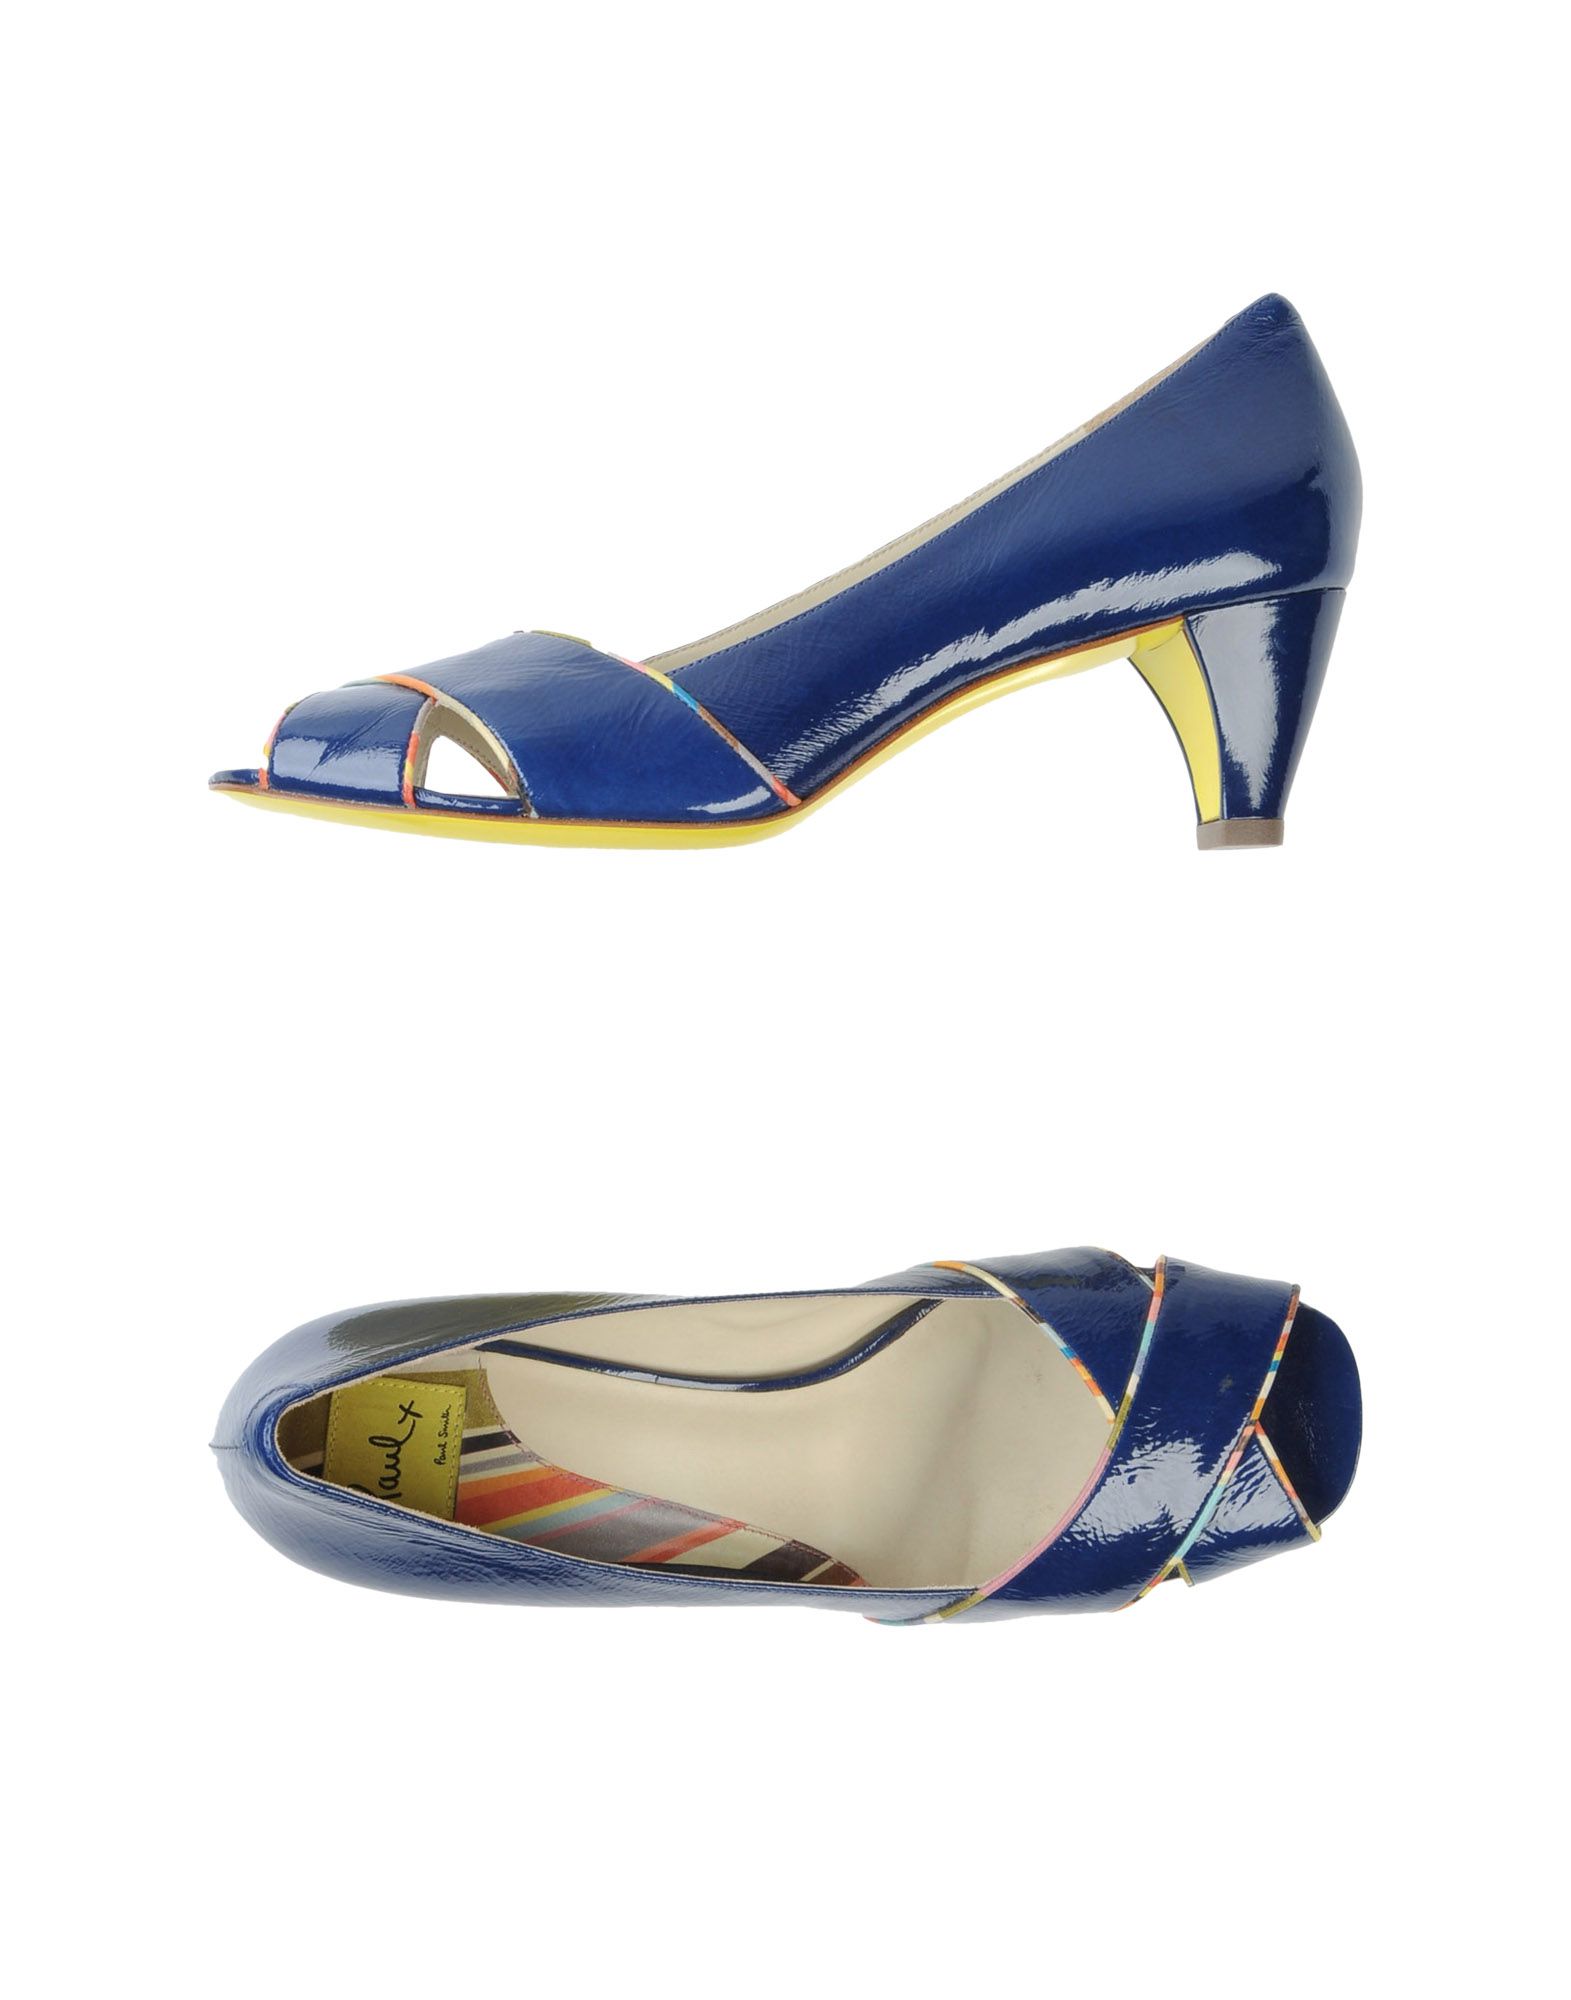 Foto Paul By Paul Smith Peep Toes Mujer Azul oscuro